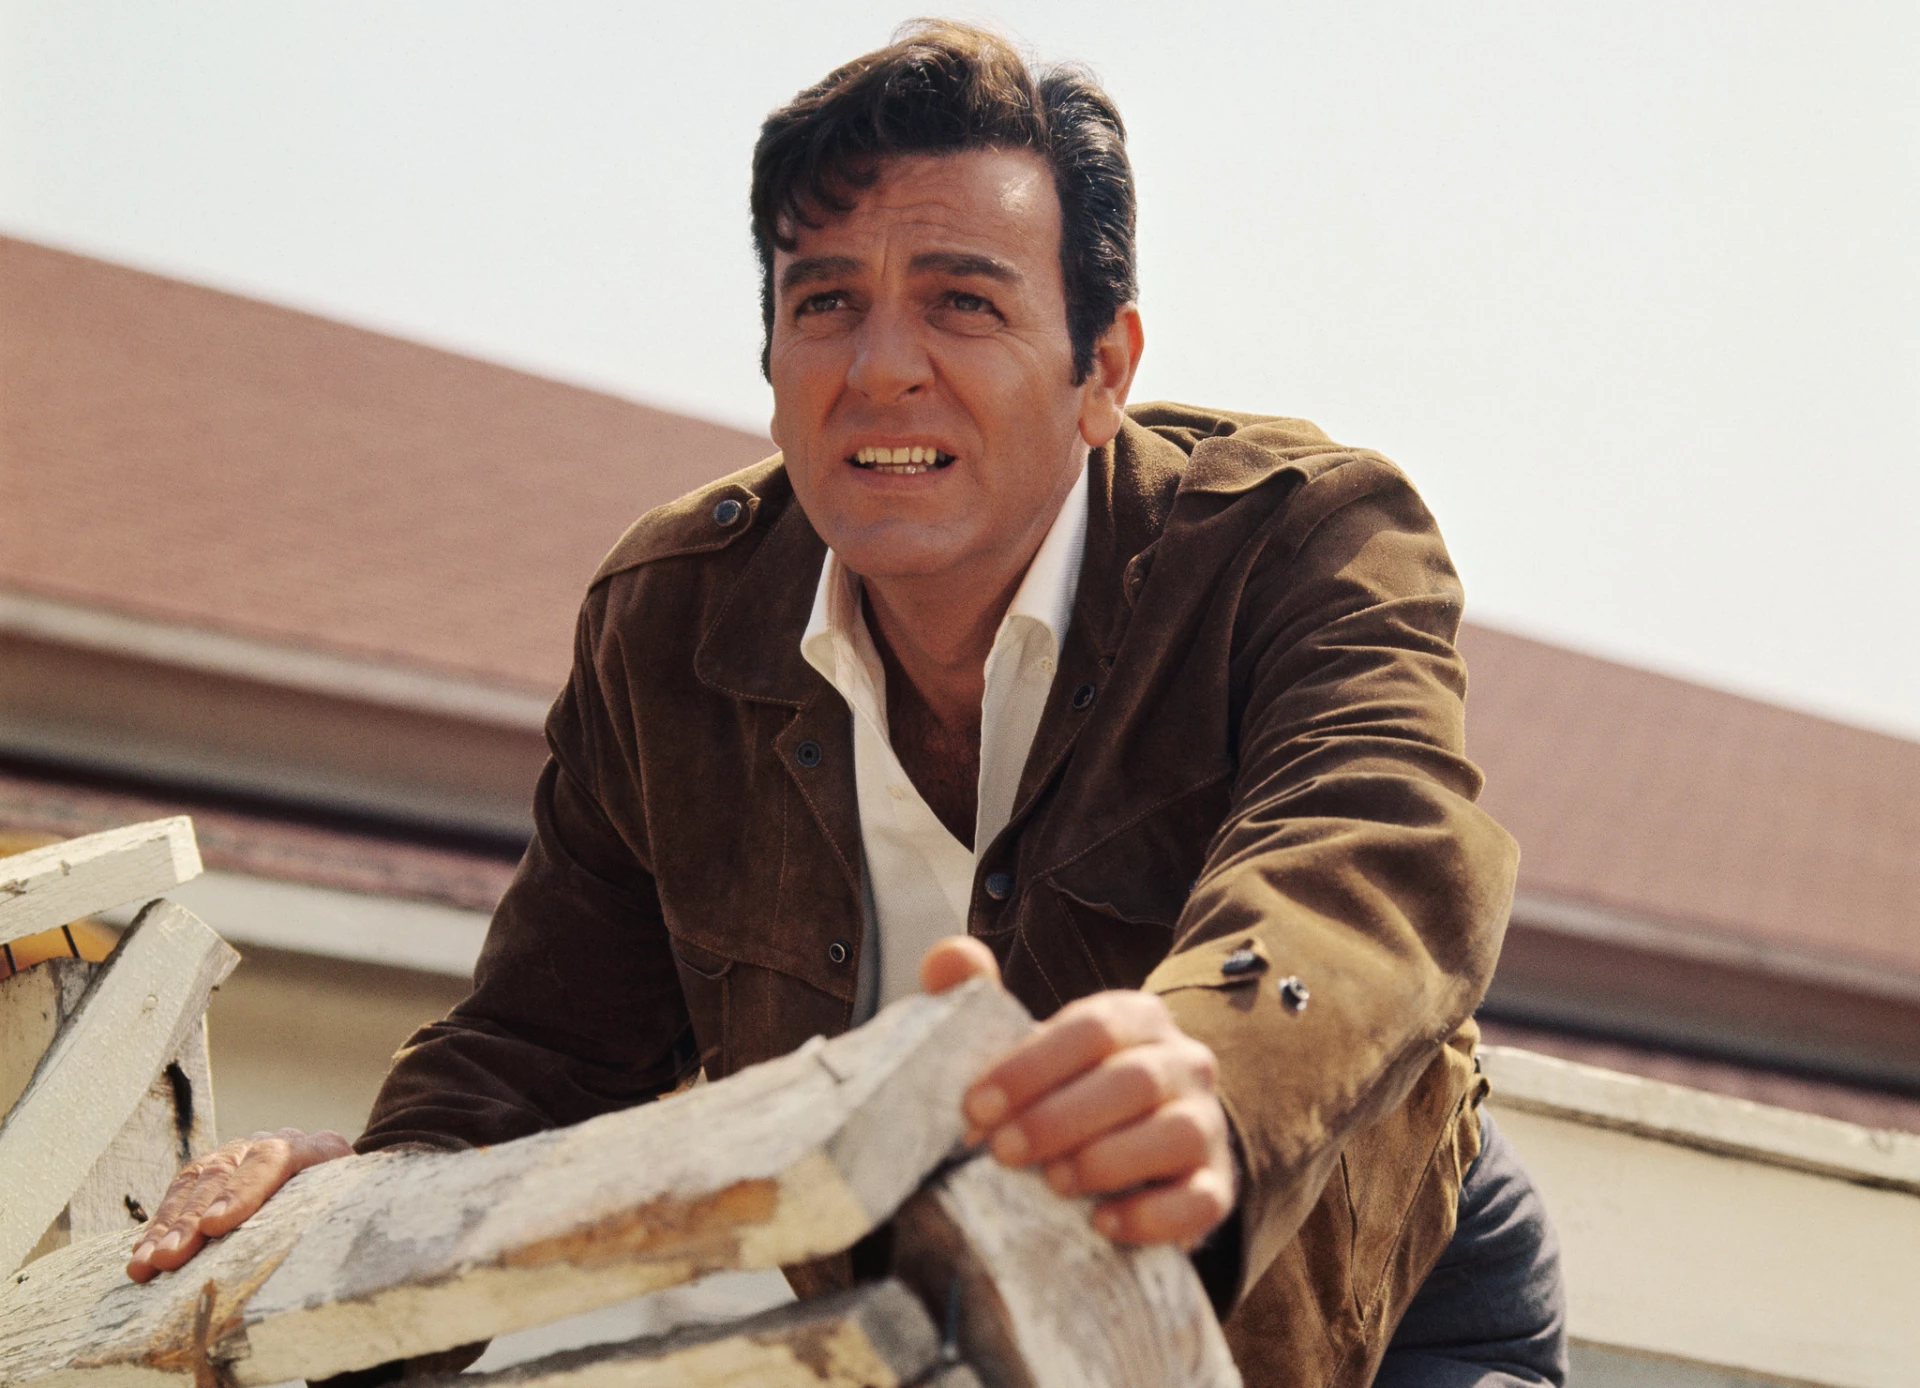 Joe Mannix, TV detective on the series, "Mannix," was famous for getting into fist fights in just about every episode of the show.